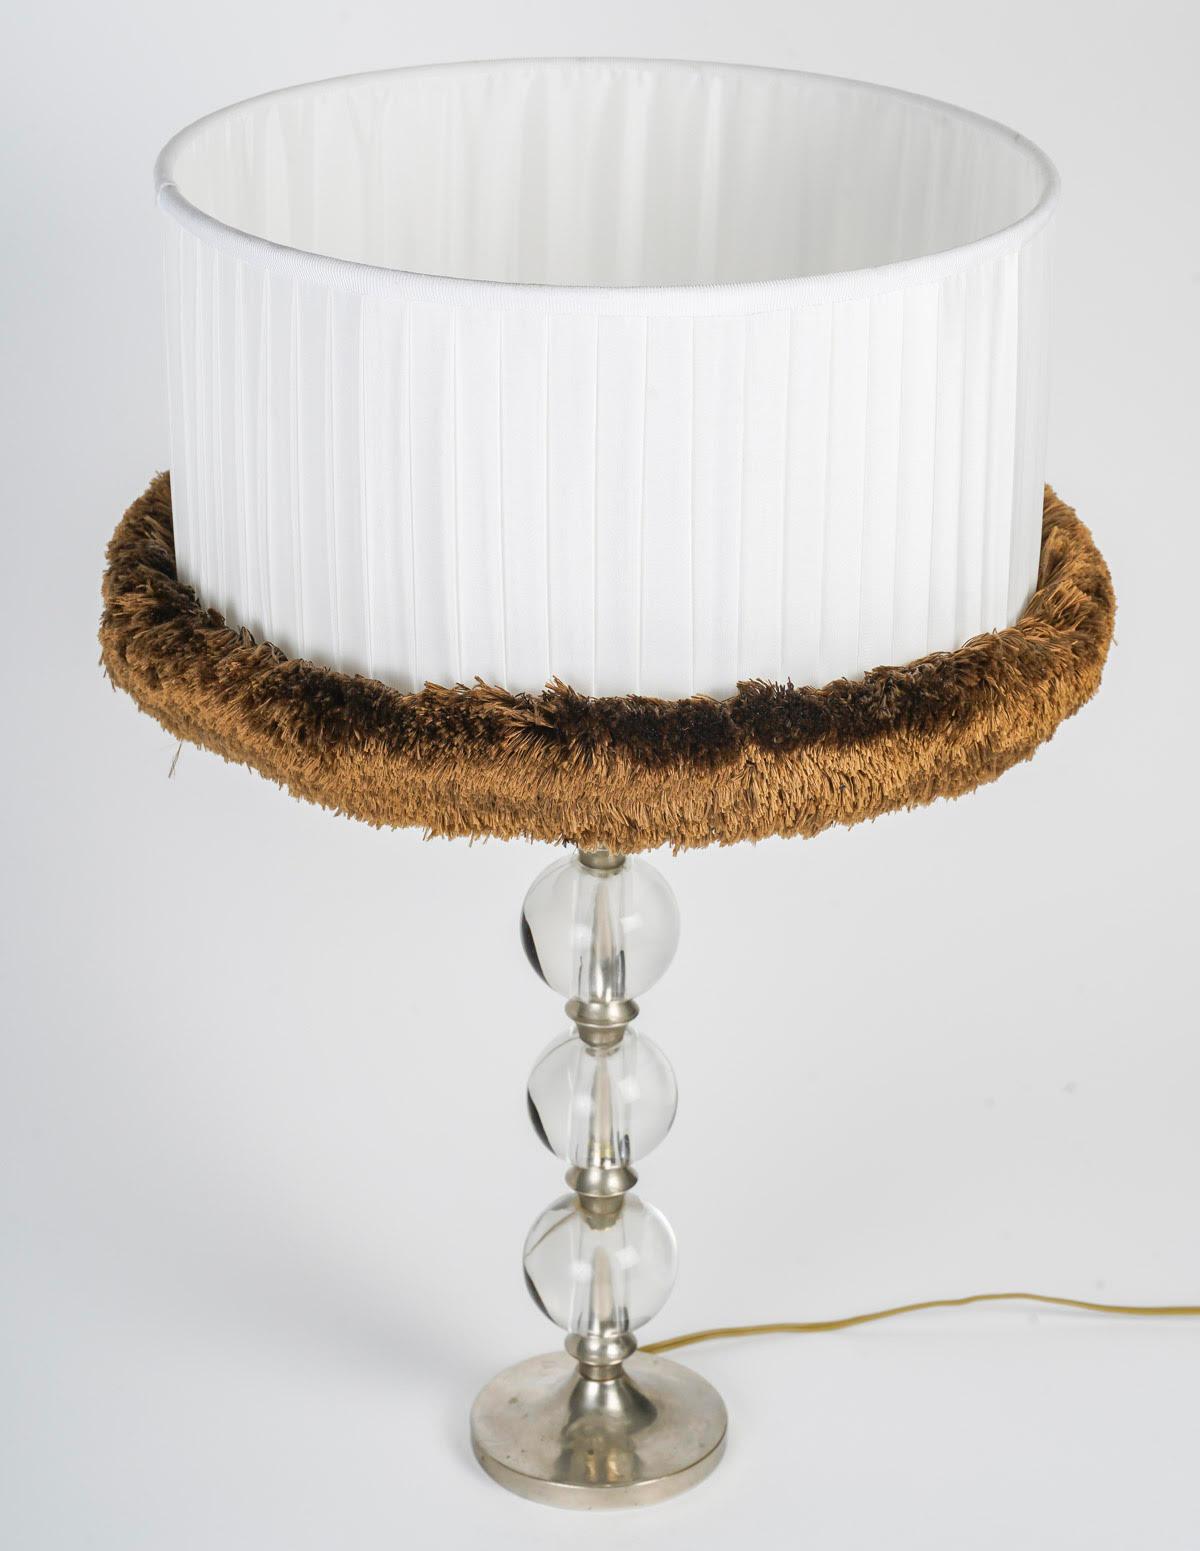 Table Lamp by Jacques Adnet in Silvered Metal and Crystal Boulle.

Table lamp by Jacques Adnet, lamp with 4 crystal balls, nickel-plated bronze base, satin and silk lampshade.  
Total: h: 62cm, d: 30cm
Lamp foot height: 40cm